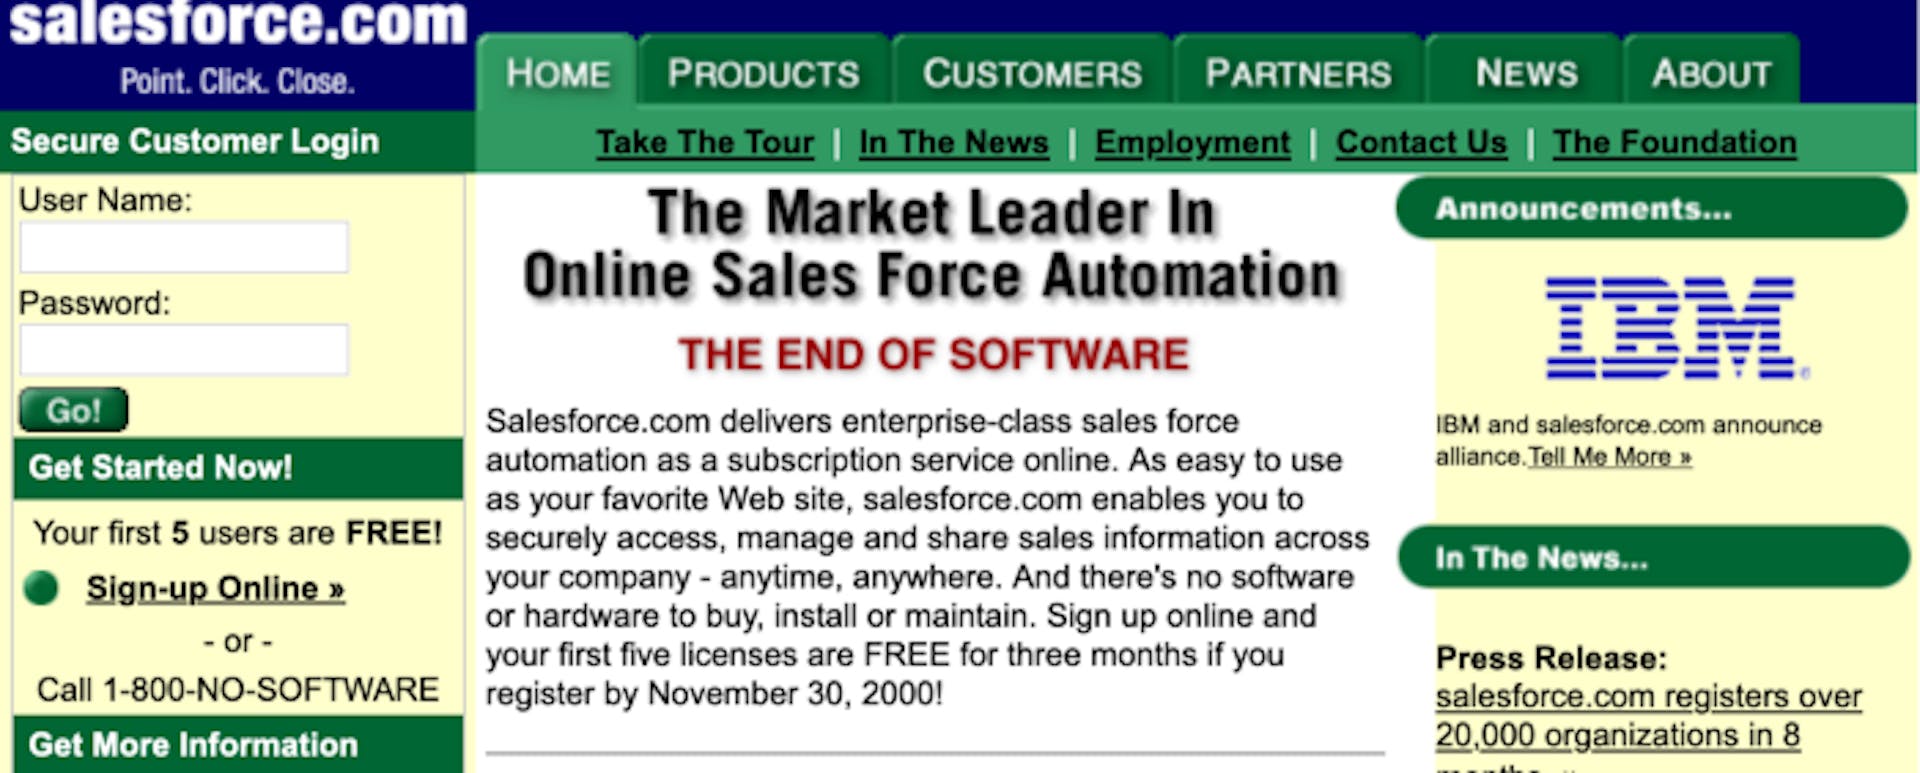 salesforce.com from April 7, 2000 accessed via the Wayback Machine (https://web.archive.org/)